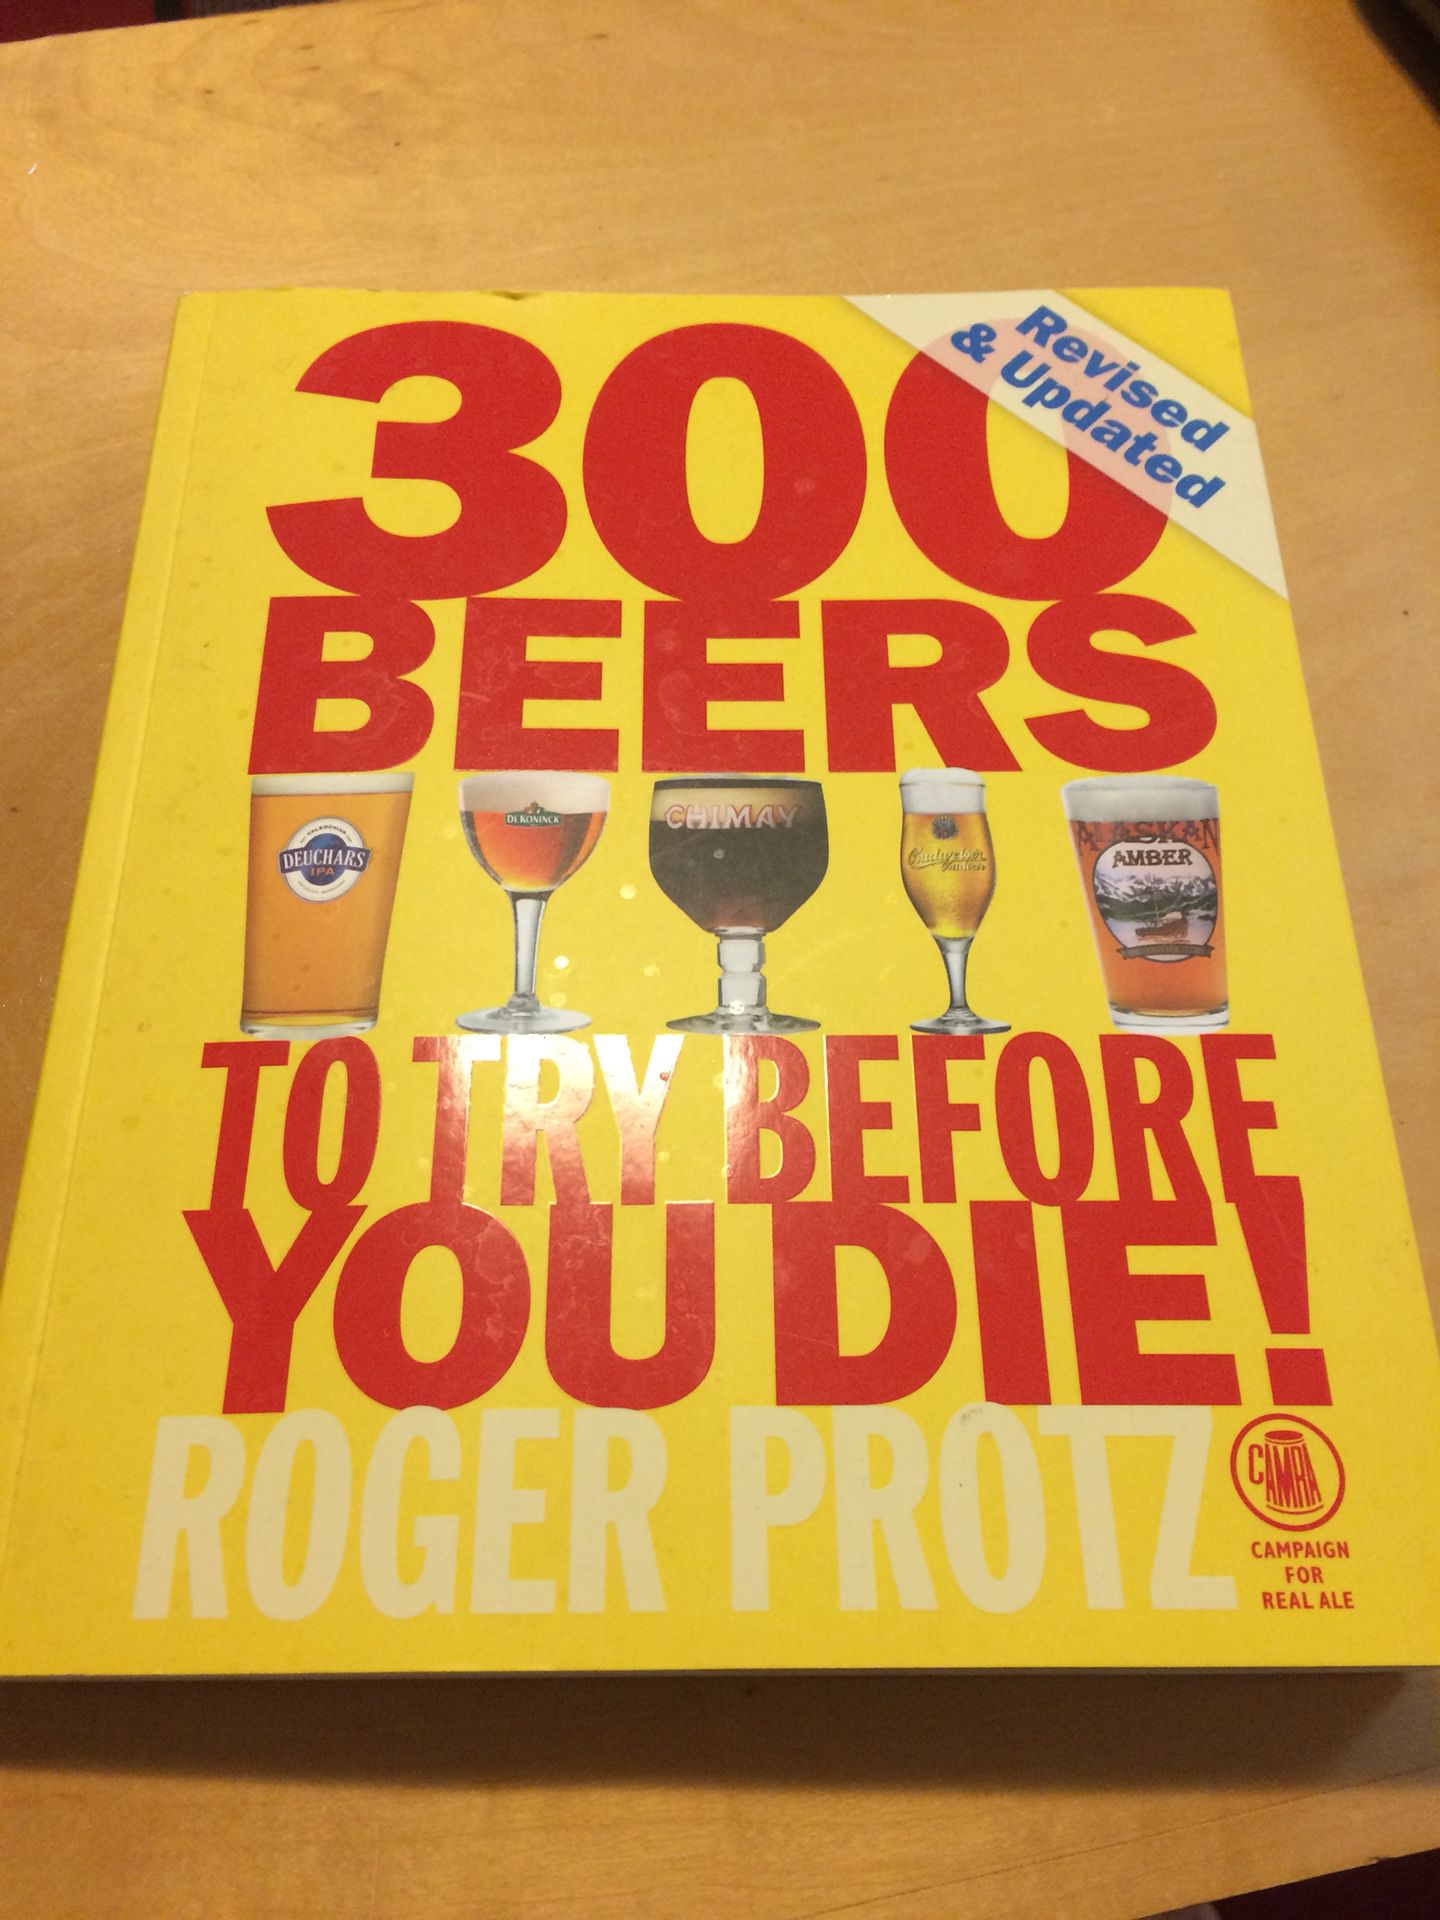 300 Beers to try before you Die! Book. Feel free to make offer.